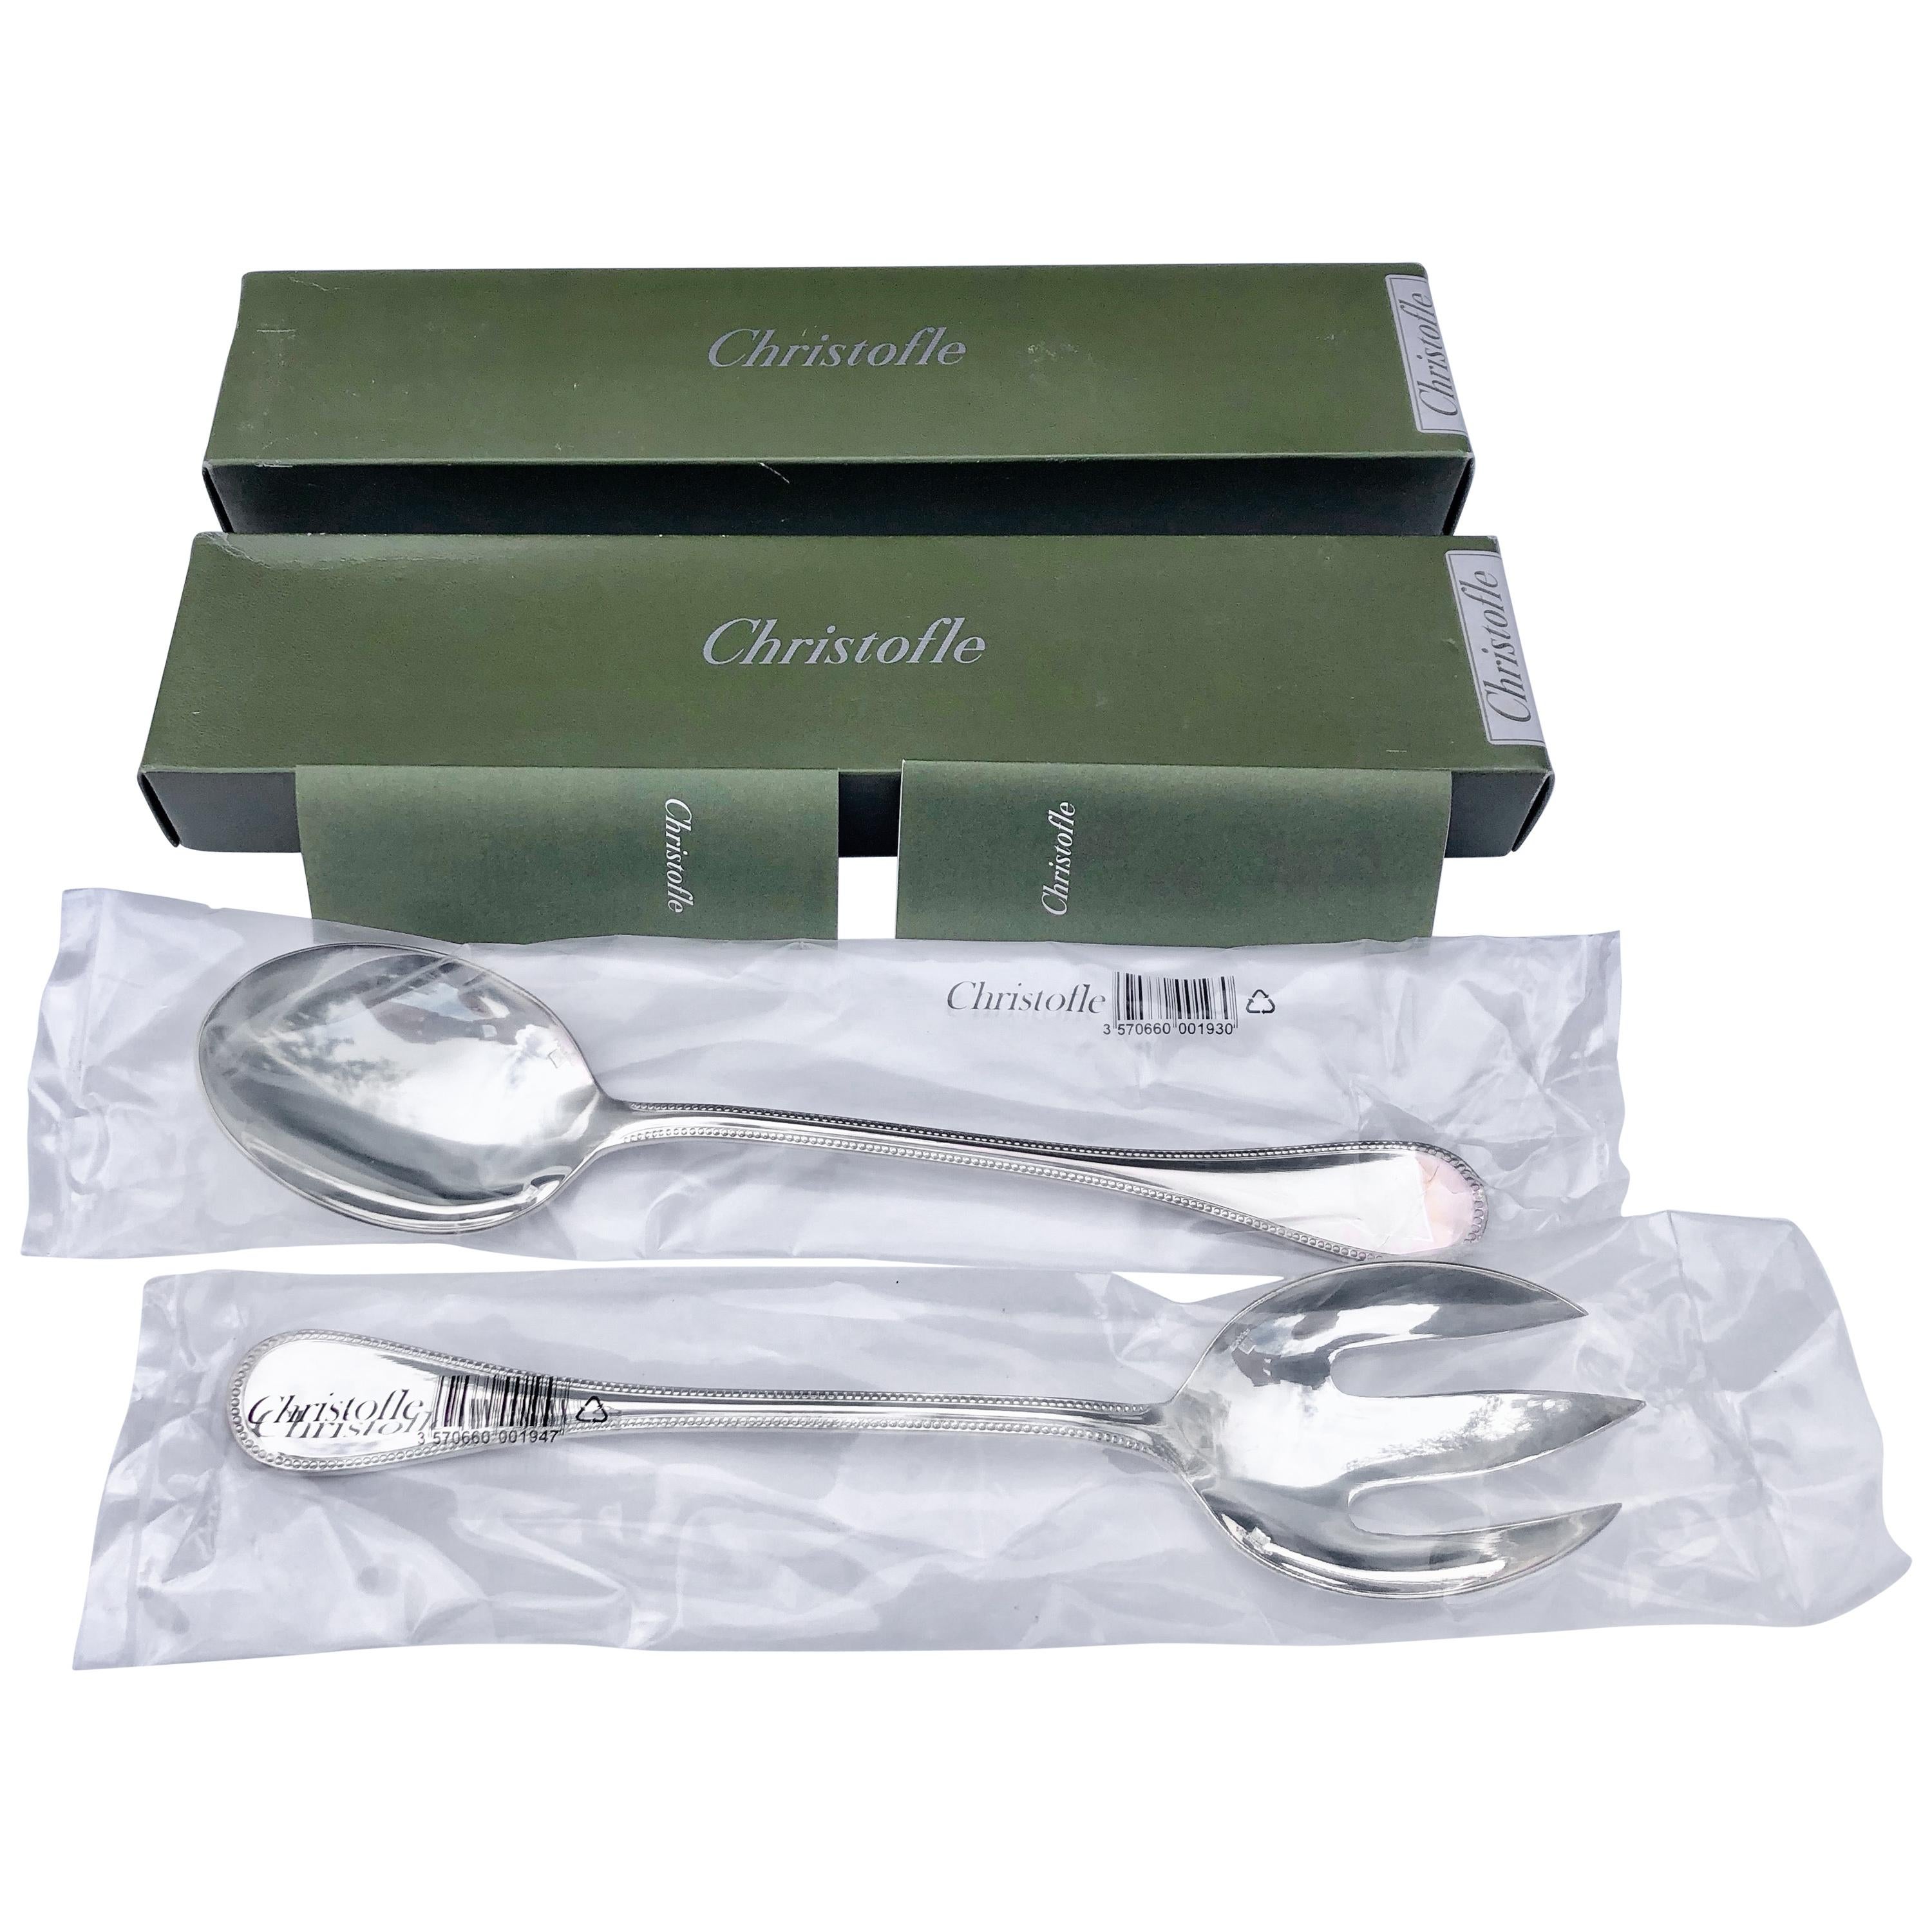 Christofle Set of 2 Silver Plated Salad Serving Spoon and Fork Perles New in Box For Sale